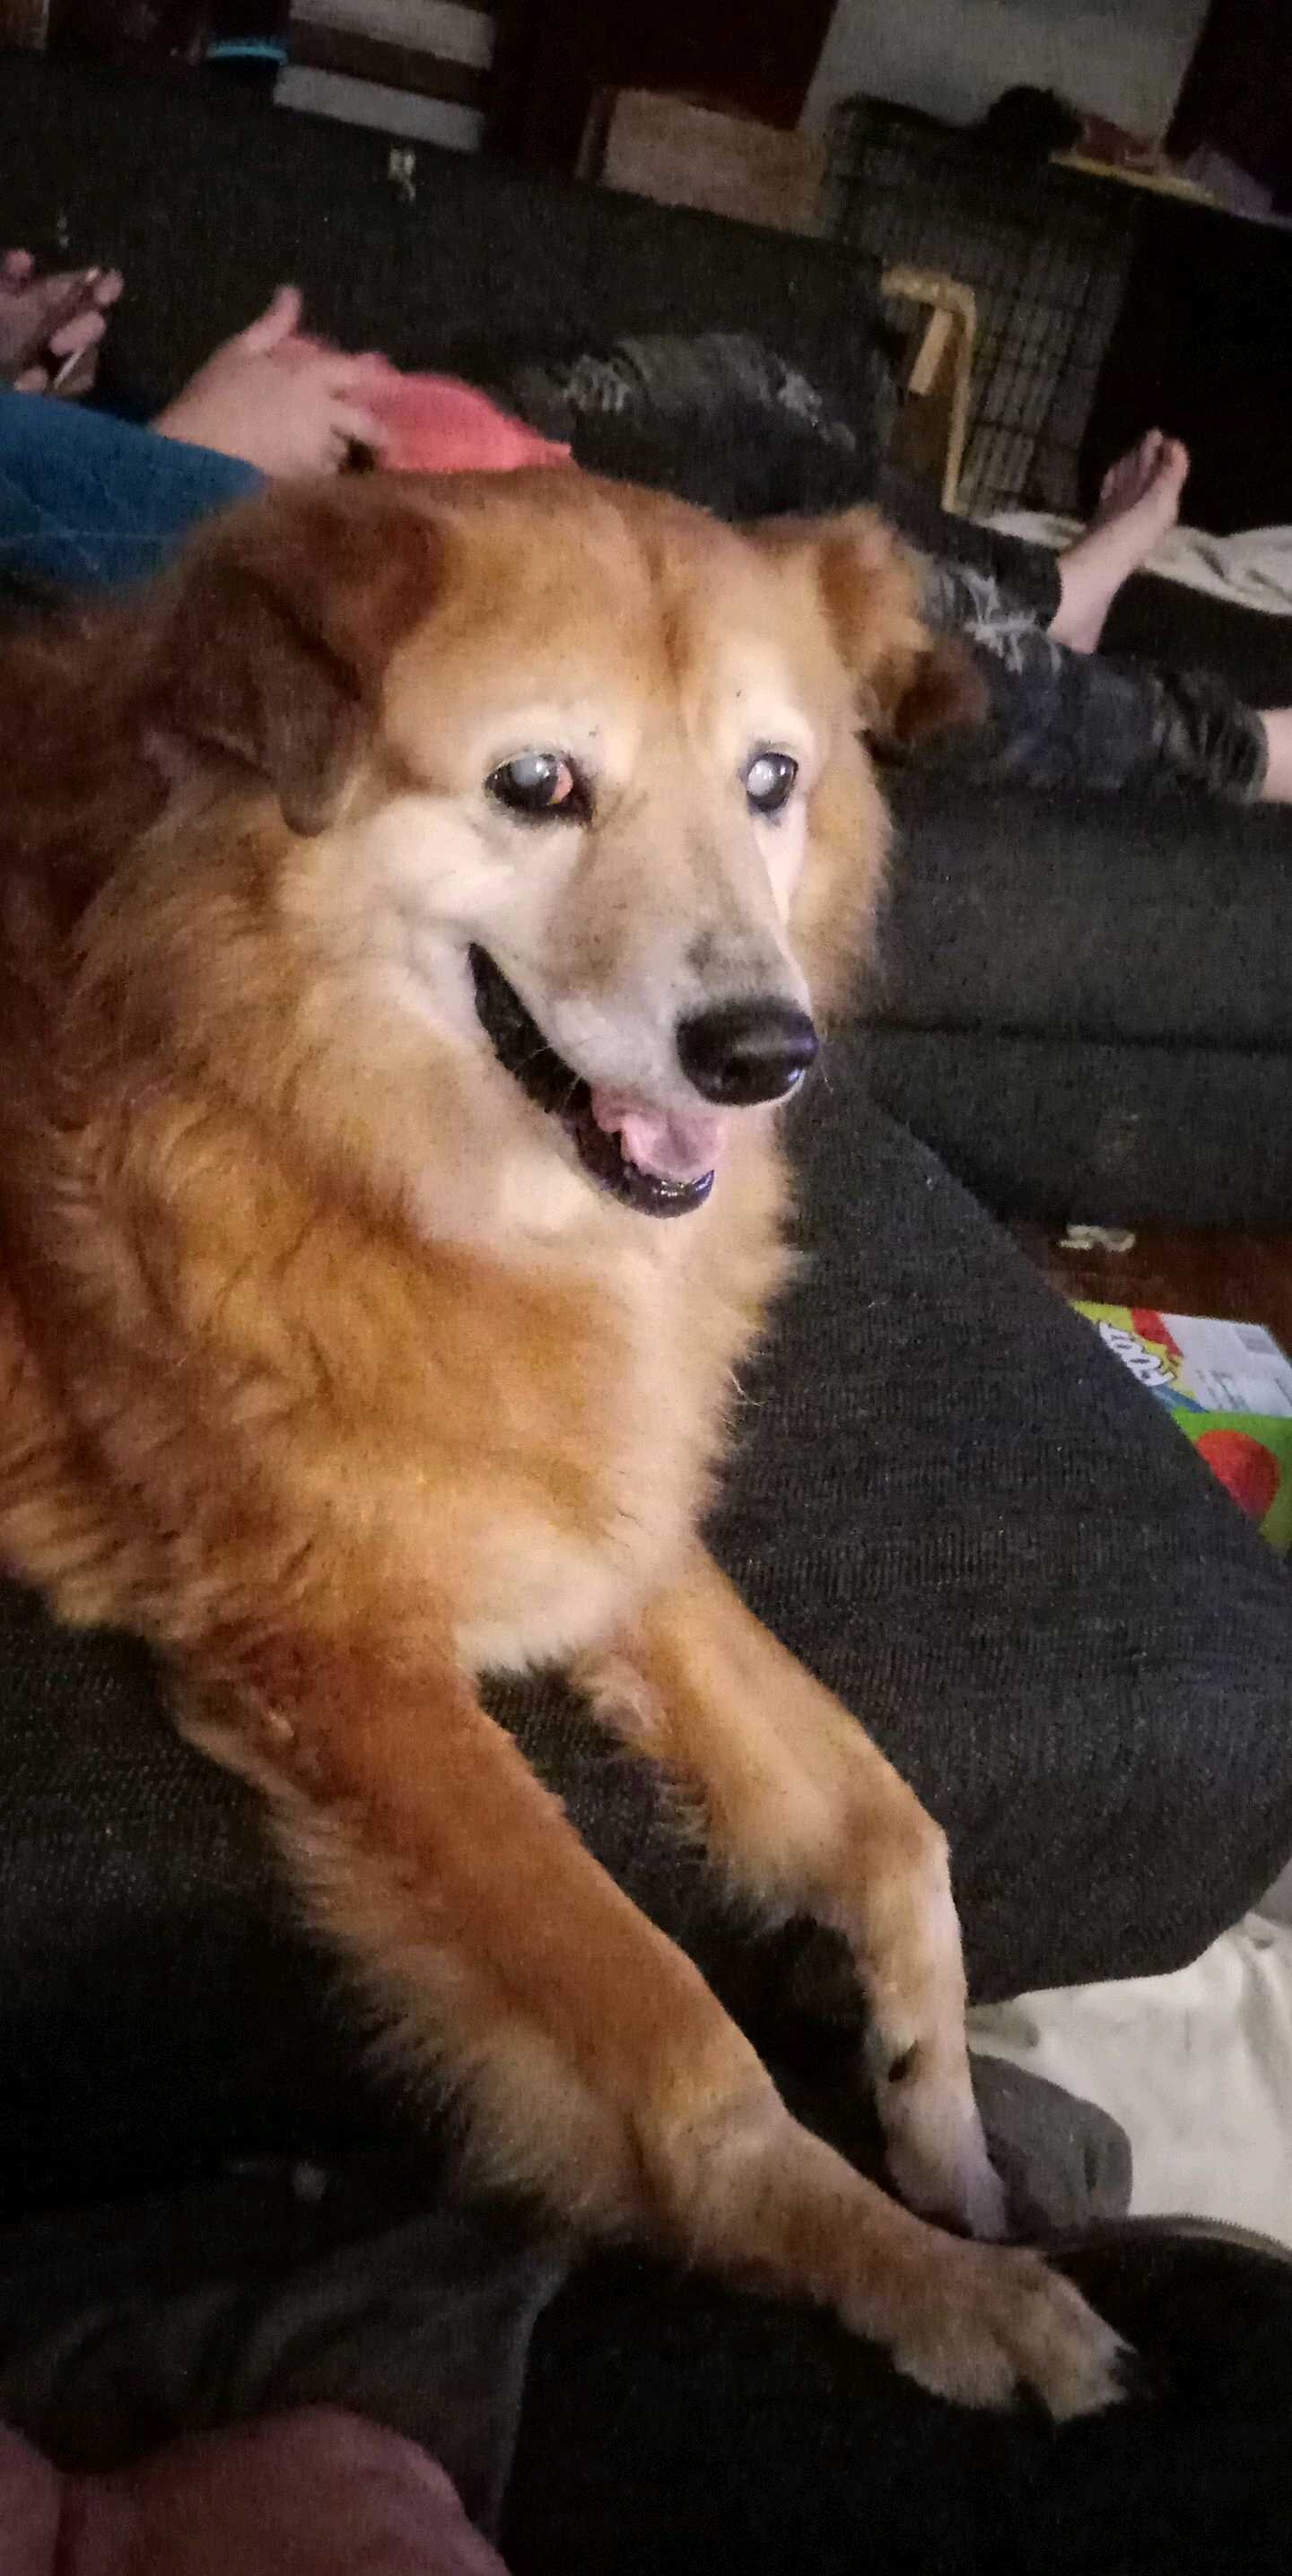  A golden retriever smiling at the camera on a couch.  